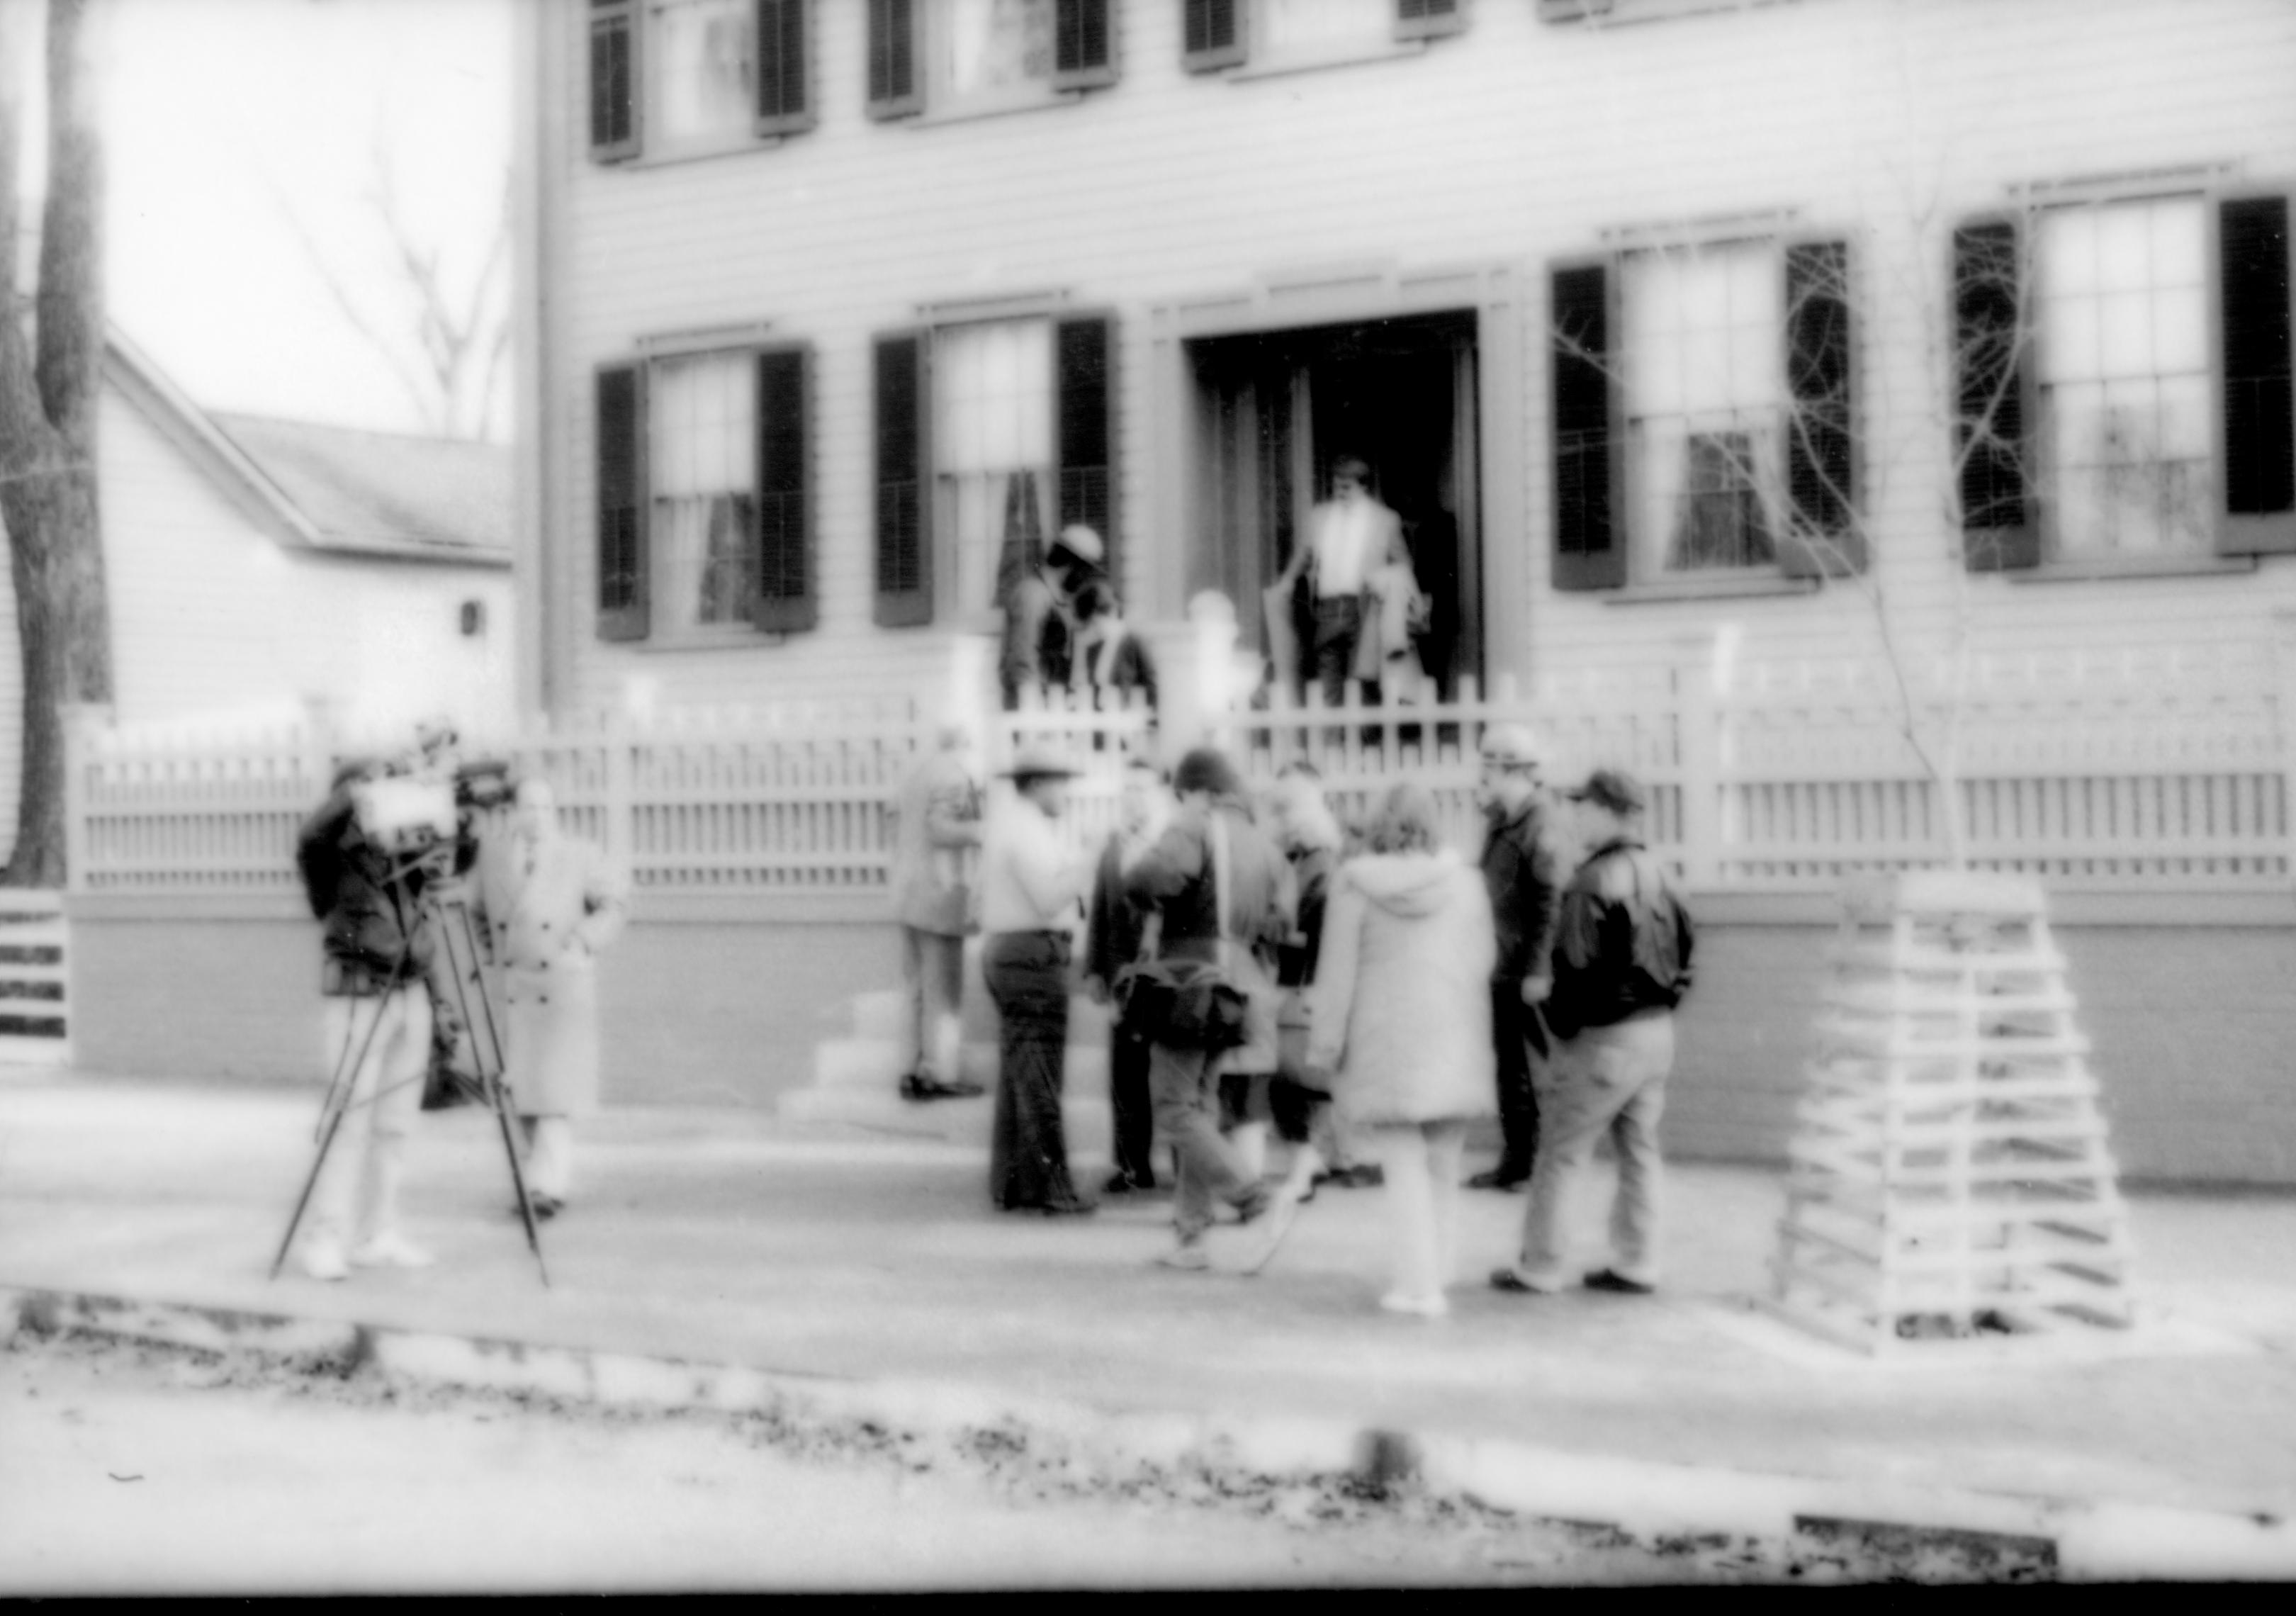 People standing on sidewalk in front of house. Lincoln Home NHS- Durbin and Simon, 79 Durbin, Simon, visit, media